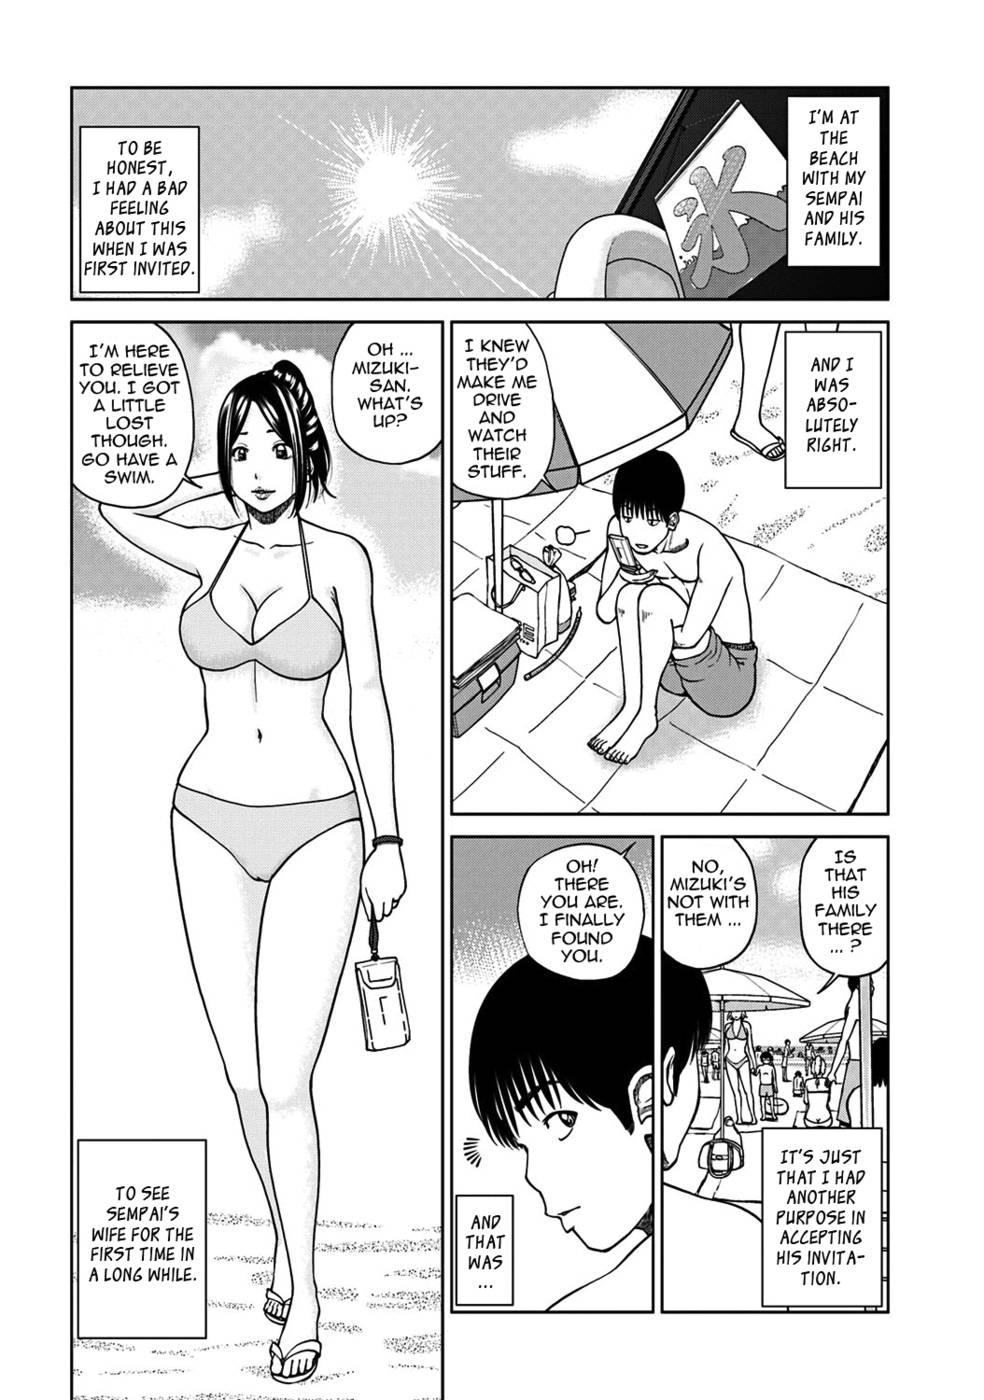 33 Year Old Unsatisfied Wife-Chapter 7-The Married Woman Who Became A Sex Friend-Hentai Manga Hentai Comic picture photo